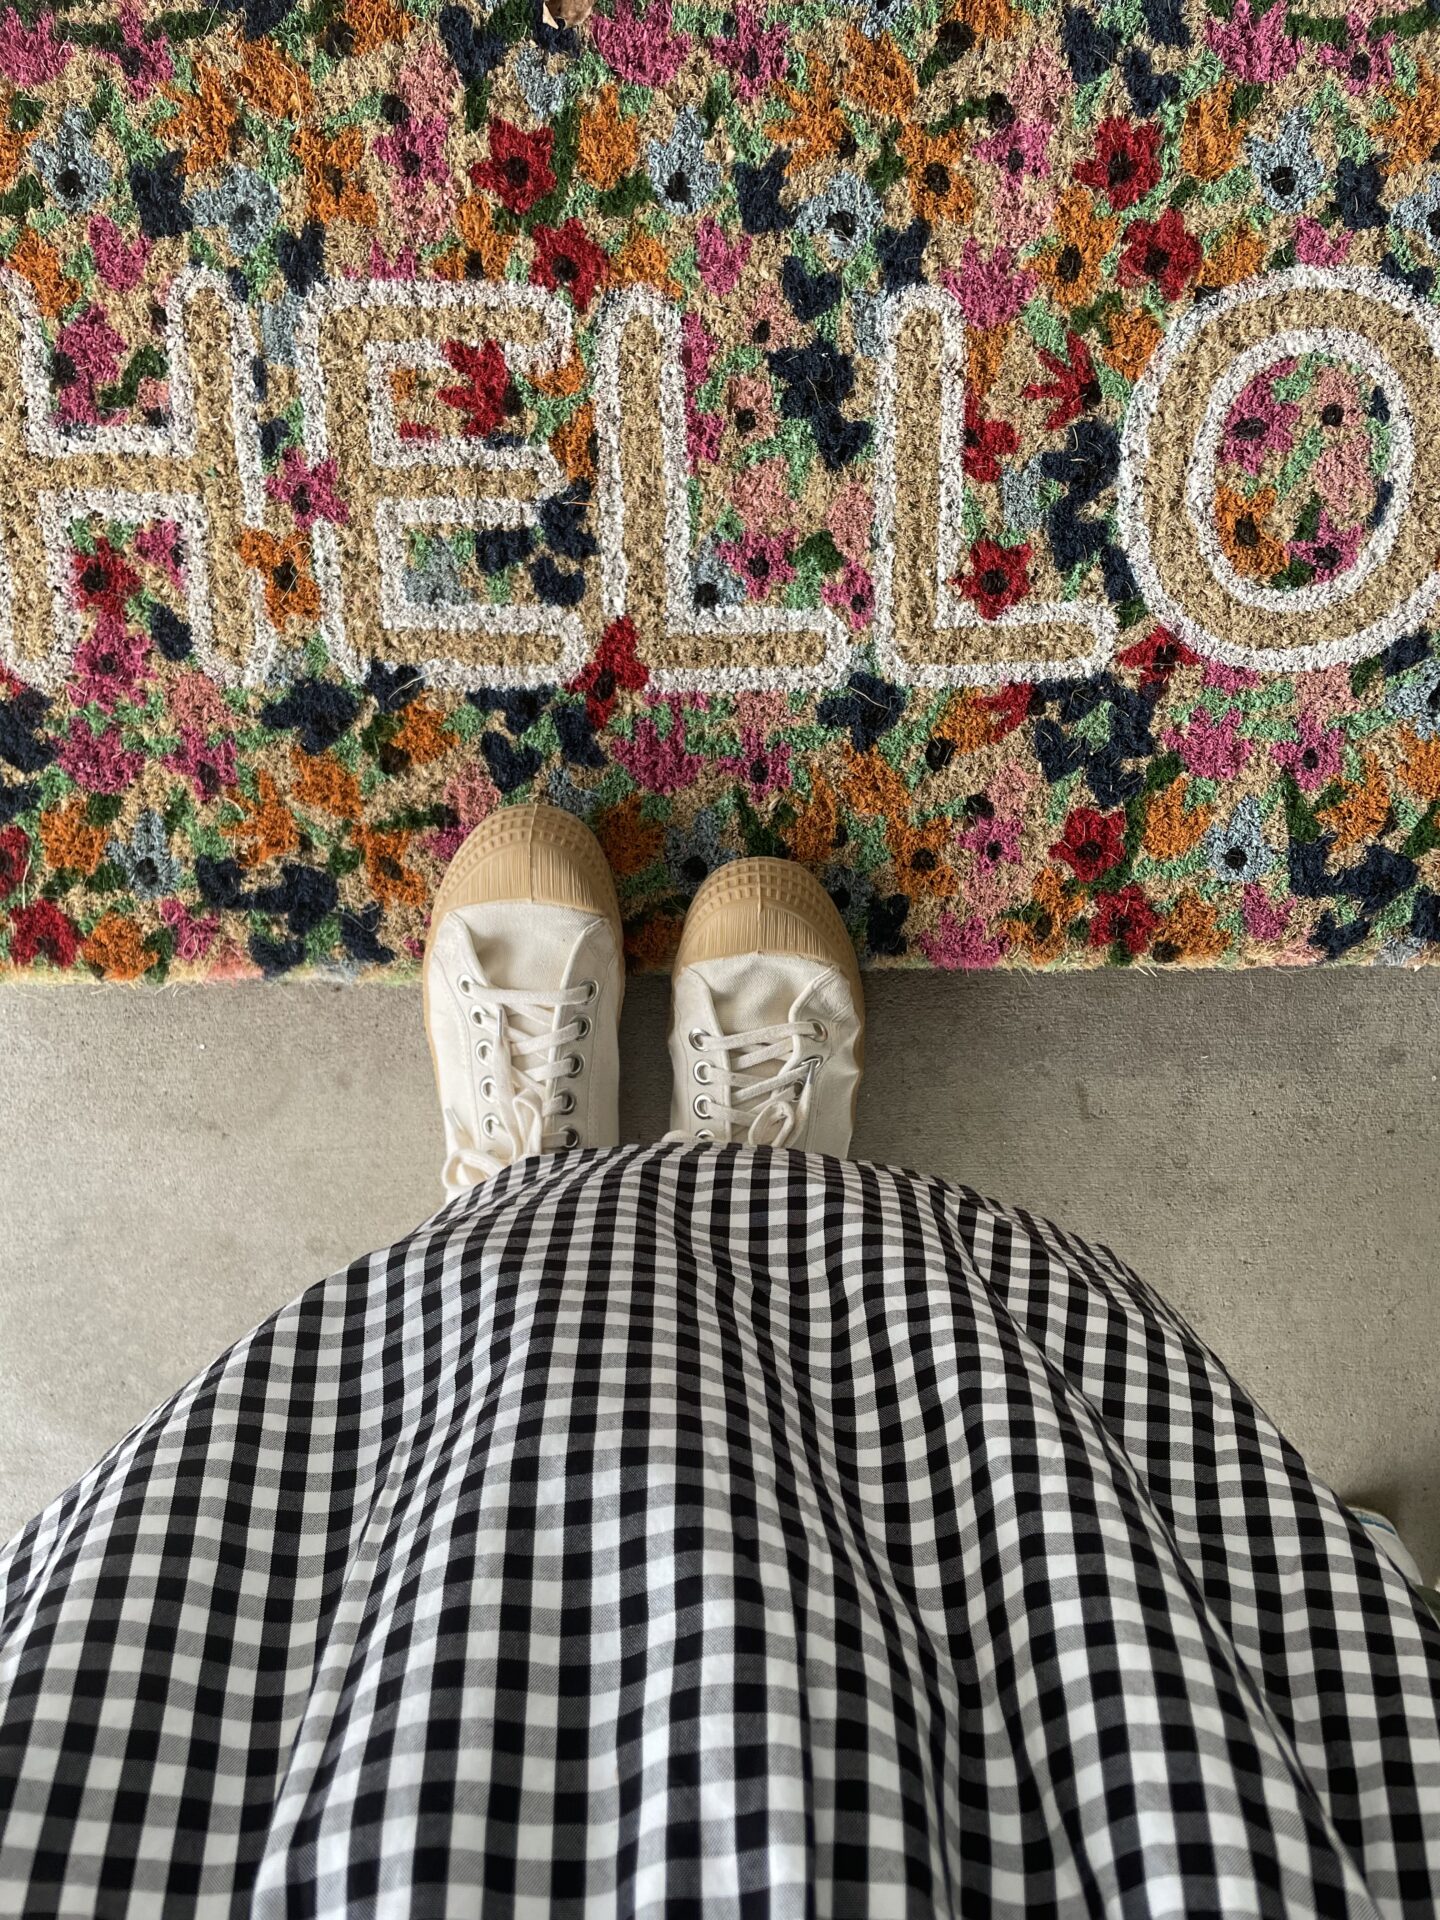 Karin Emily shares a floral hello door mat for her Mother's Day Gift Guide